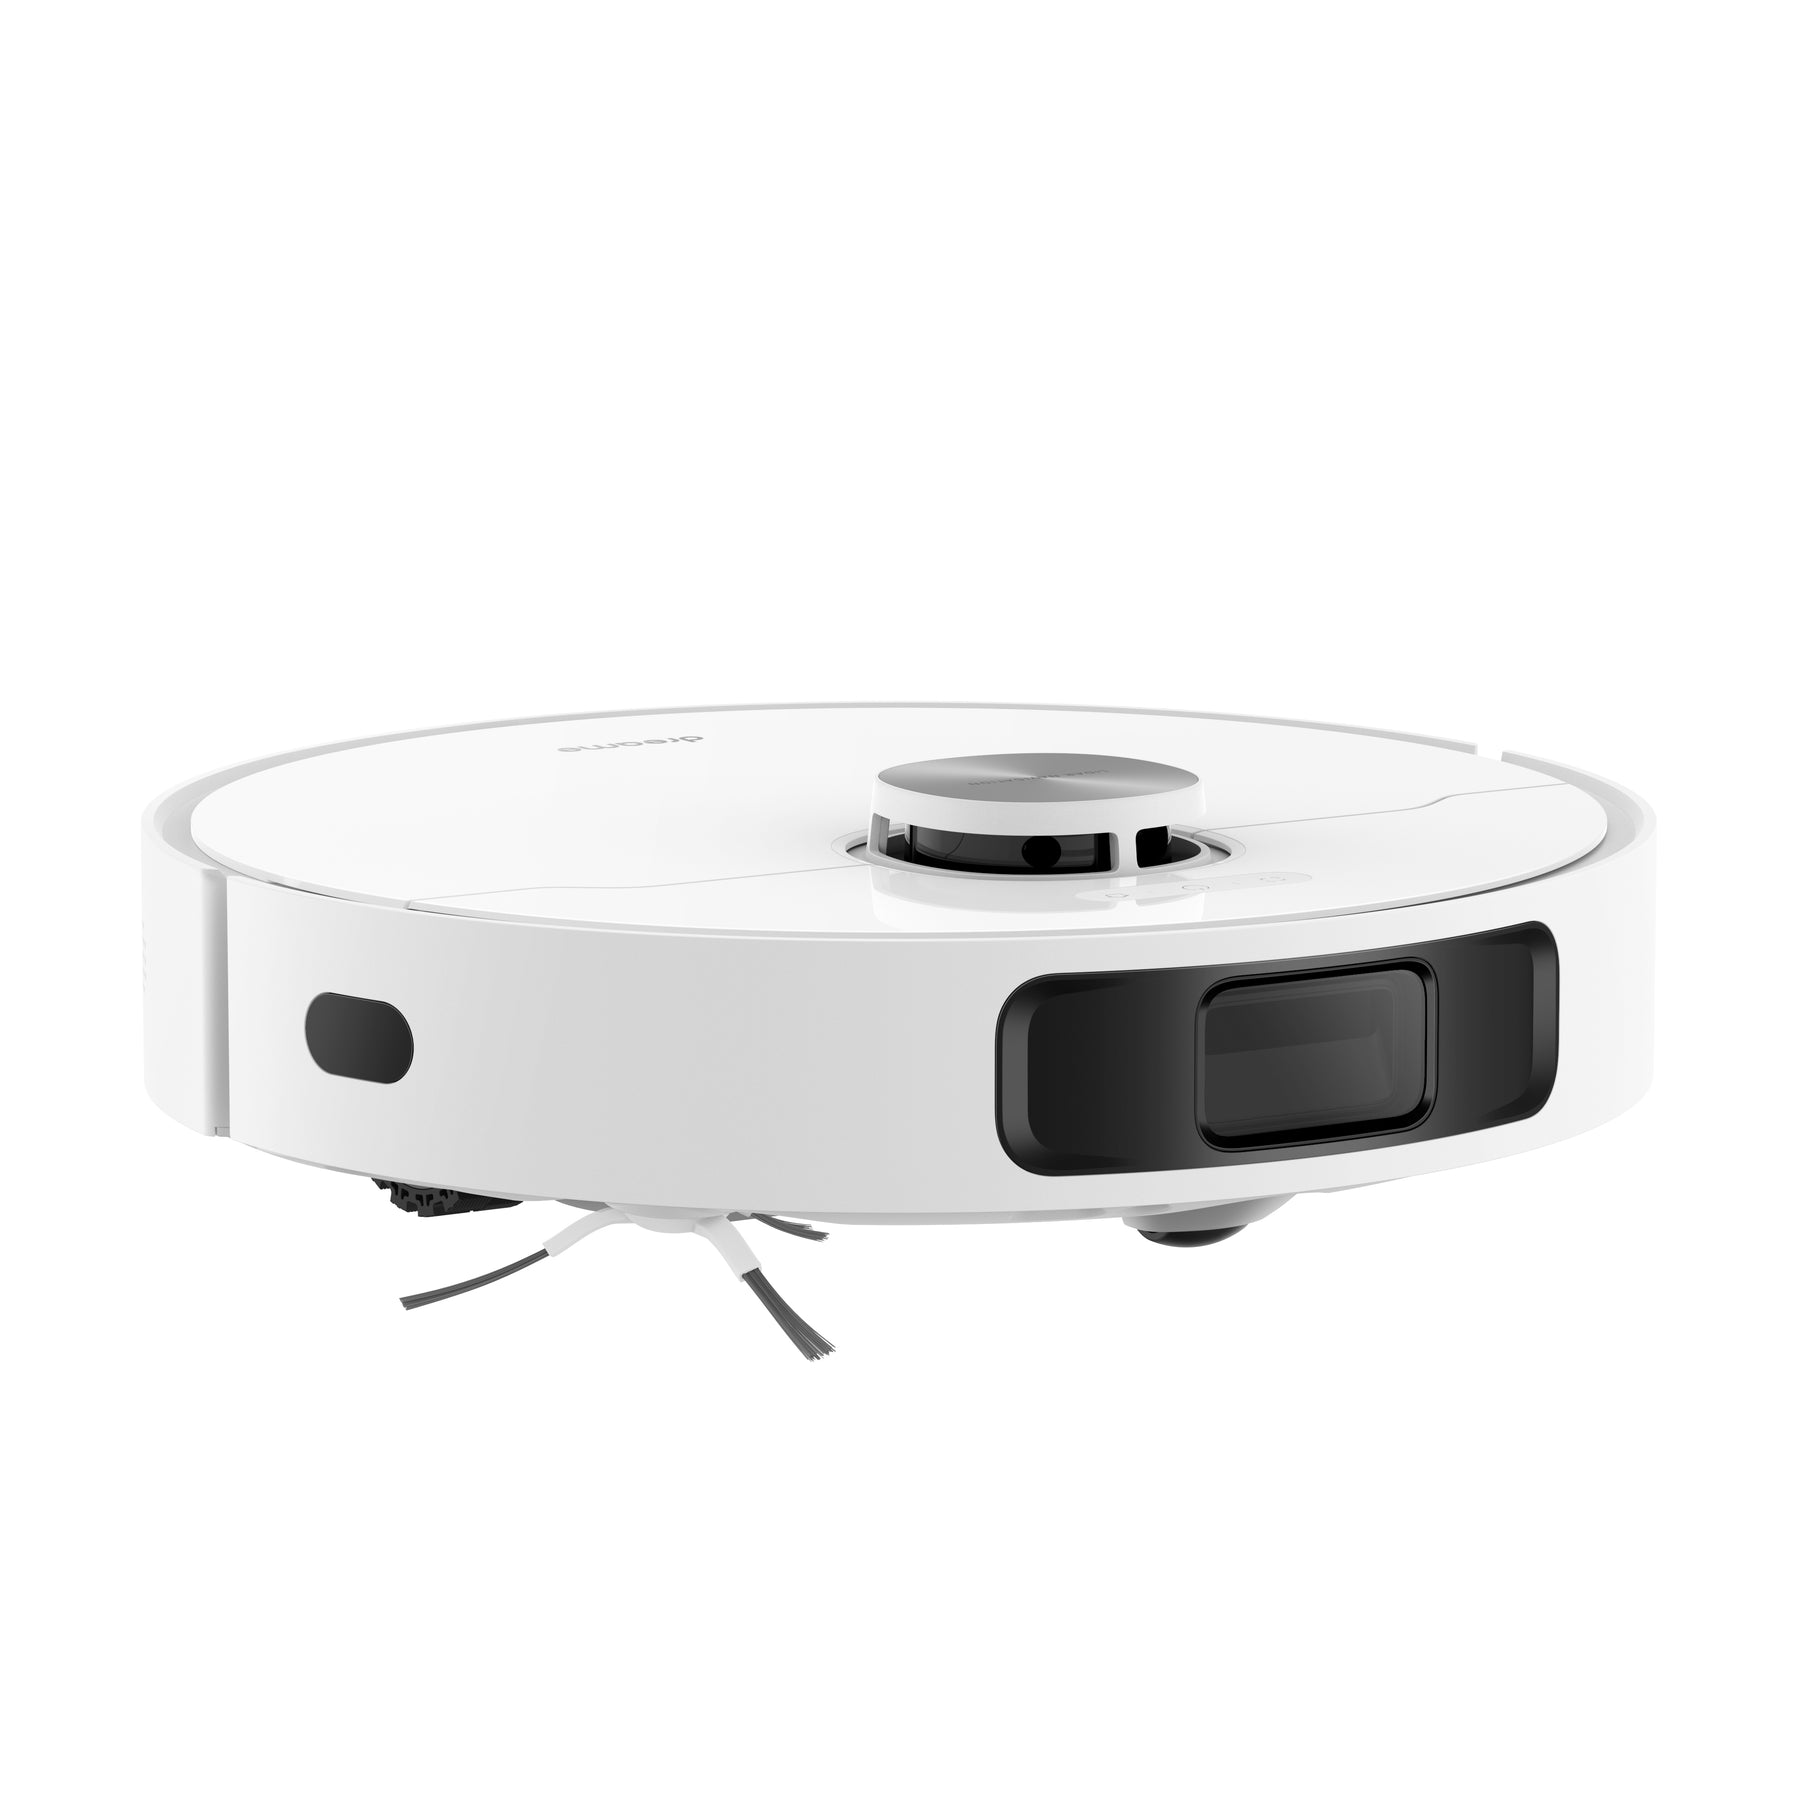 (PREORDER 10 MAY) Dreame L10 Ultra Robot Vacuum Cleaner